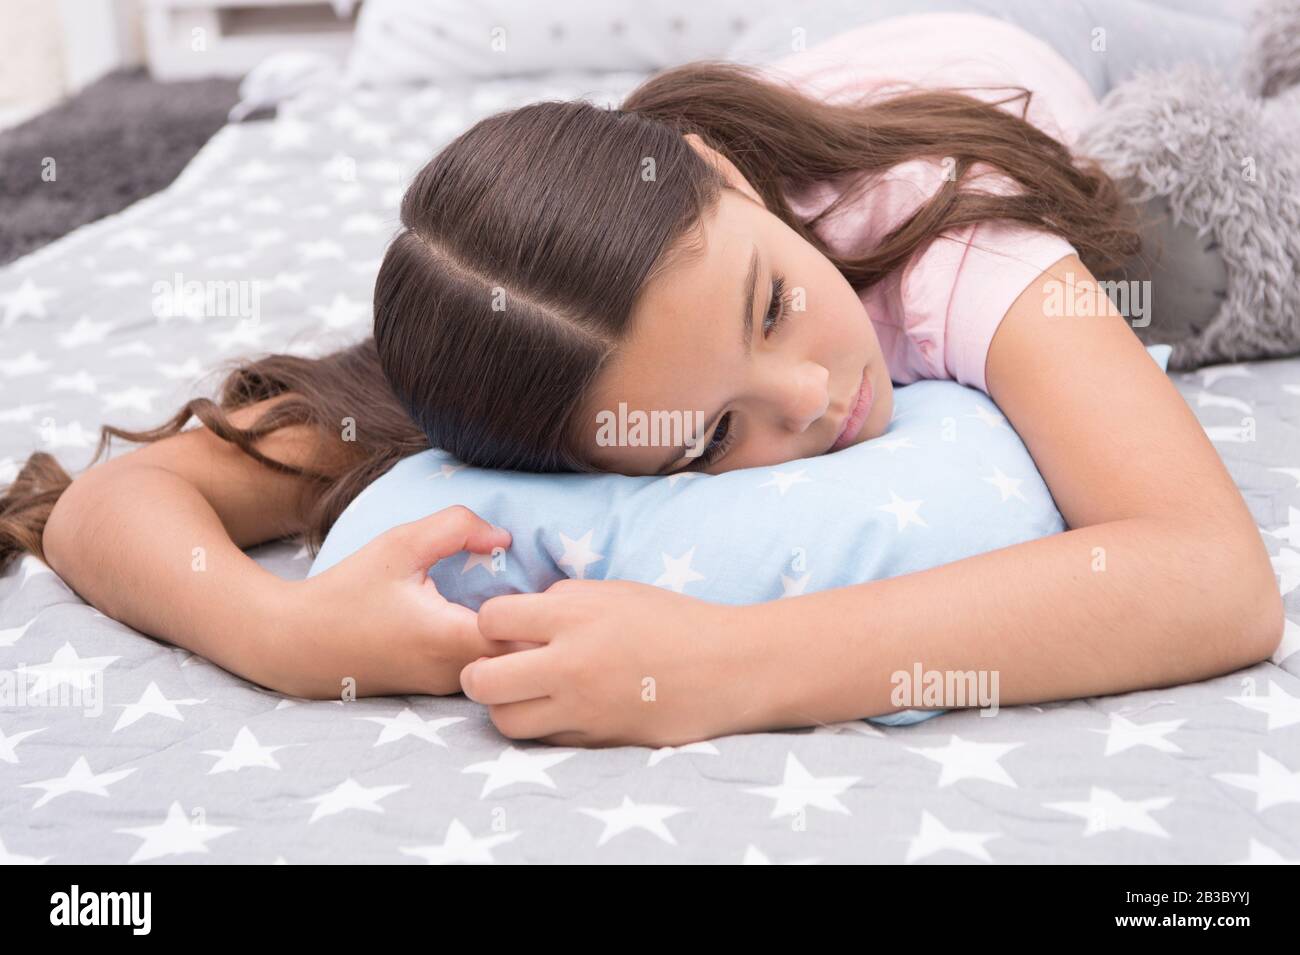 Sleepy beauty. Sleepy baby. Small girl relax in bed. Little child with sleepy look. Early morning or late evening. Bedtime routine. Nap time. She feels sleepy. Stock Photo